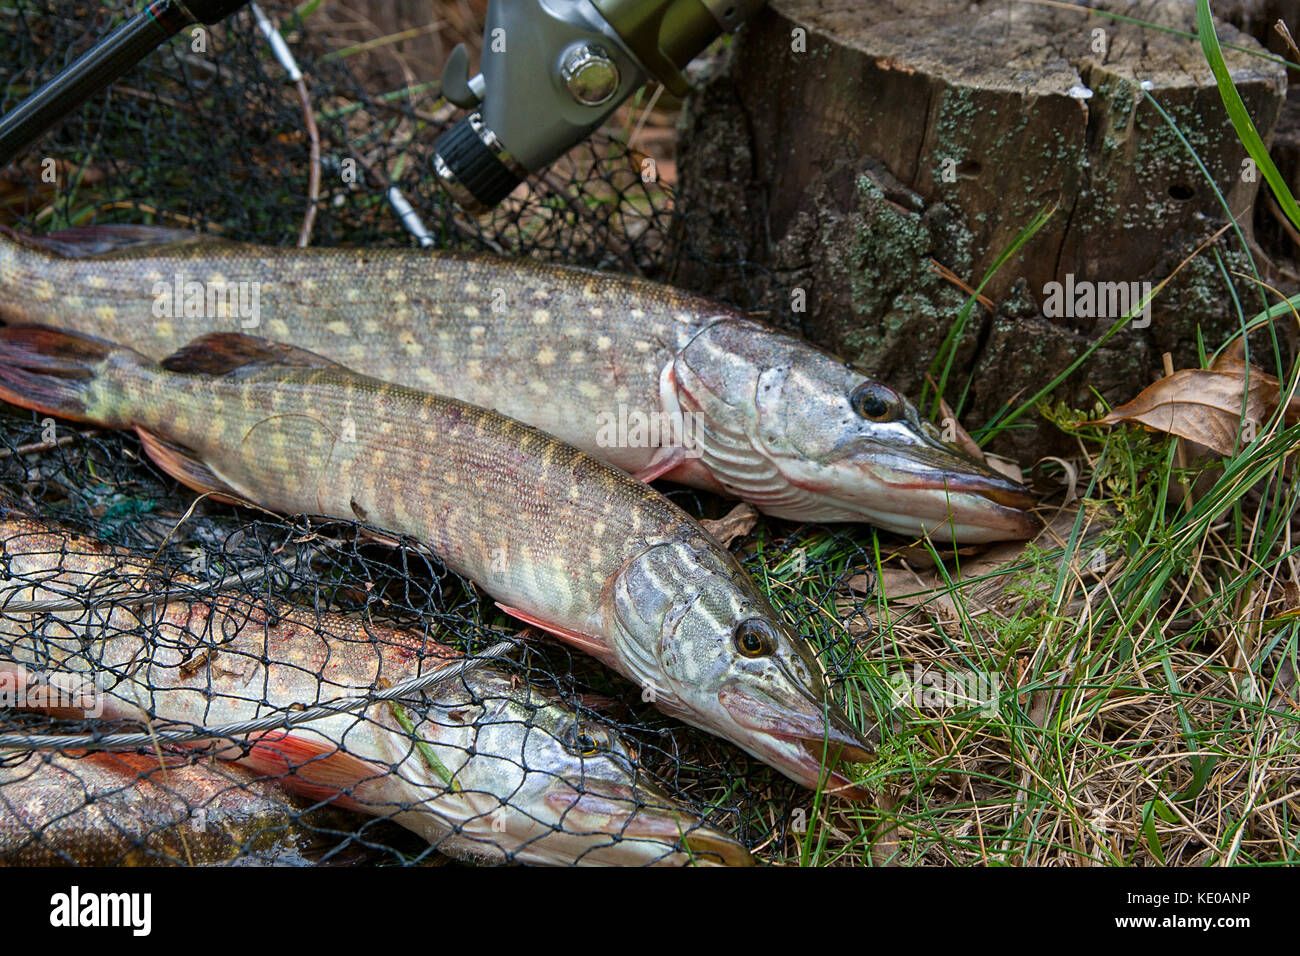 Freshwater Northern pike fish know as Esox Lucius lying on landing